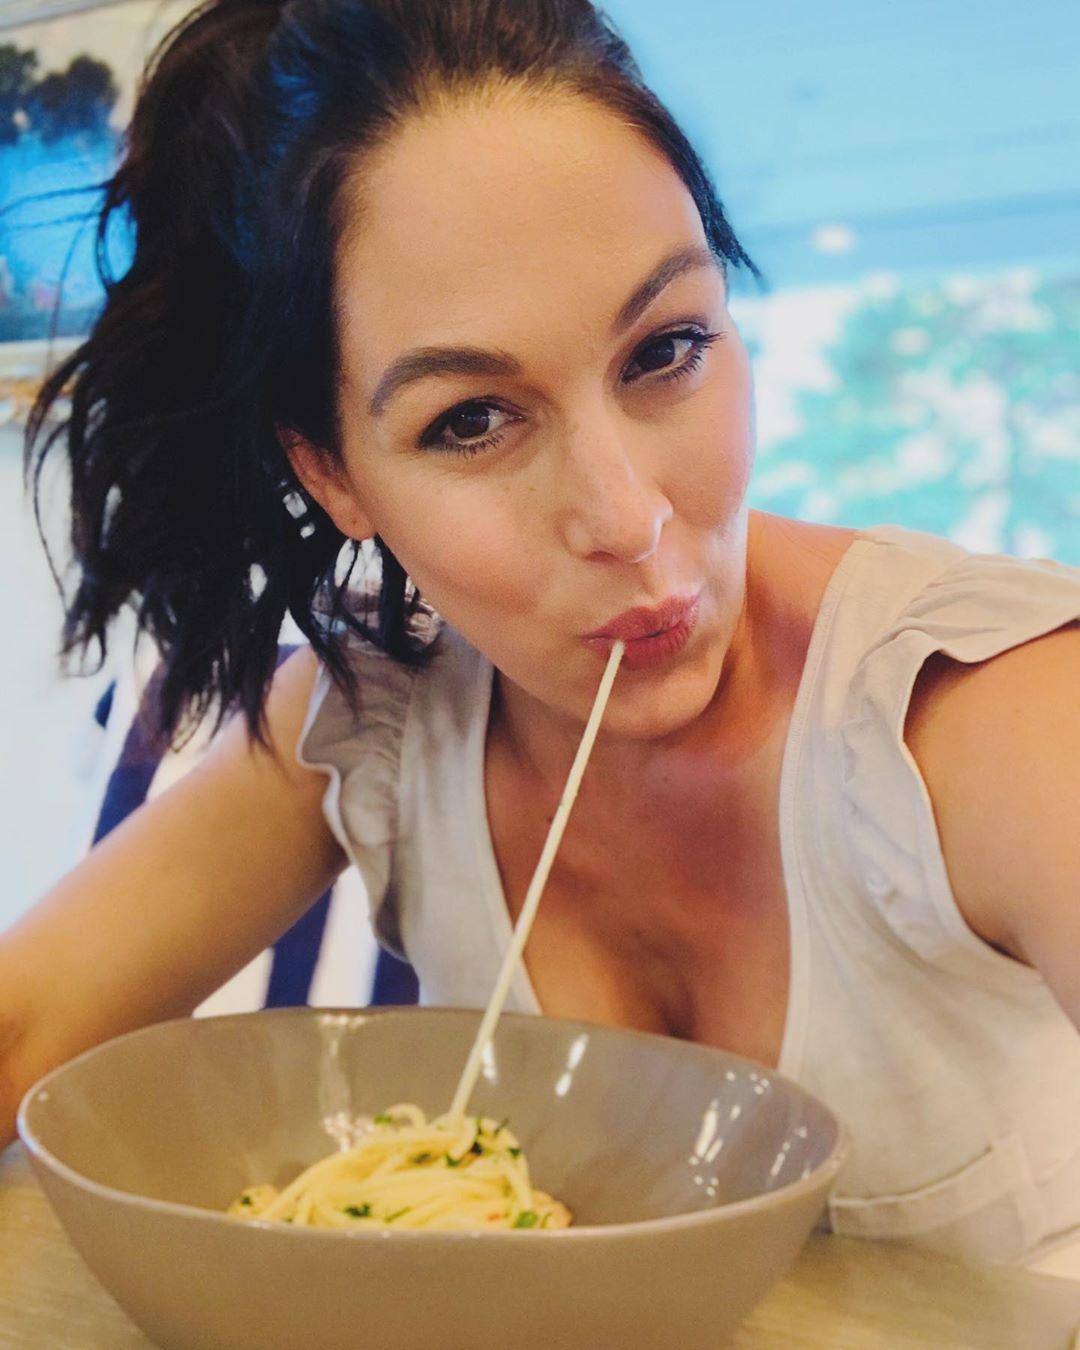 60+ Hot Pictures of Brie Bella Will Drive You Nuts For Her 14